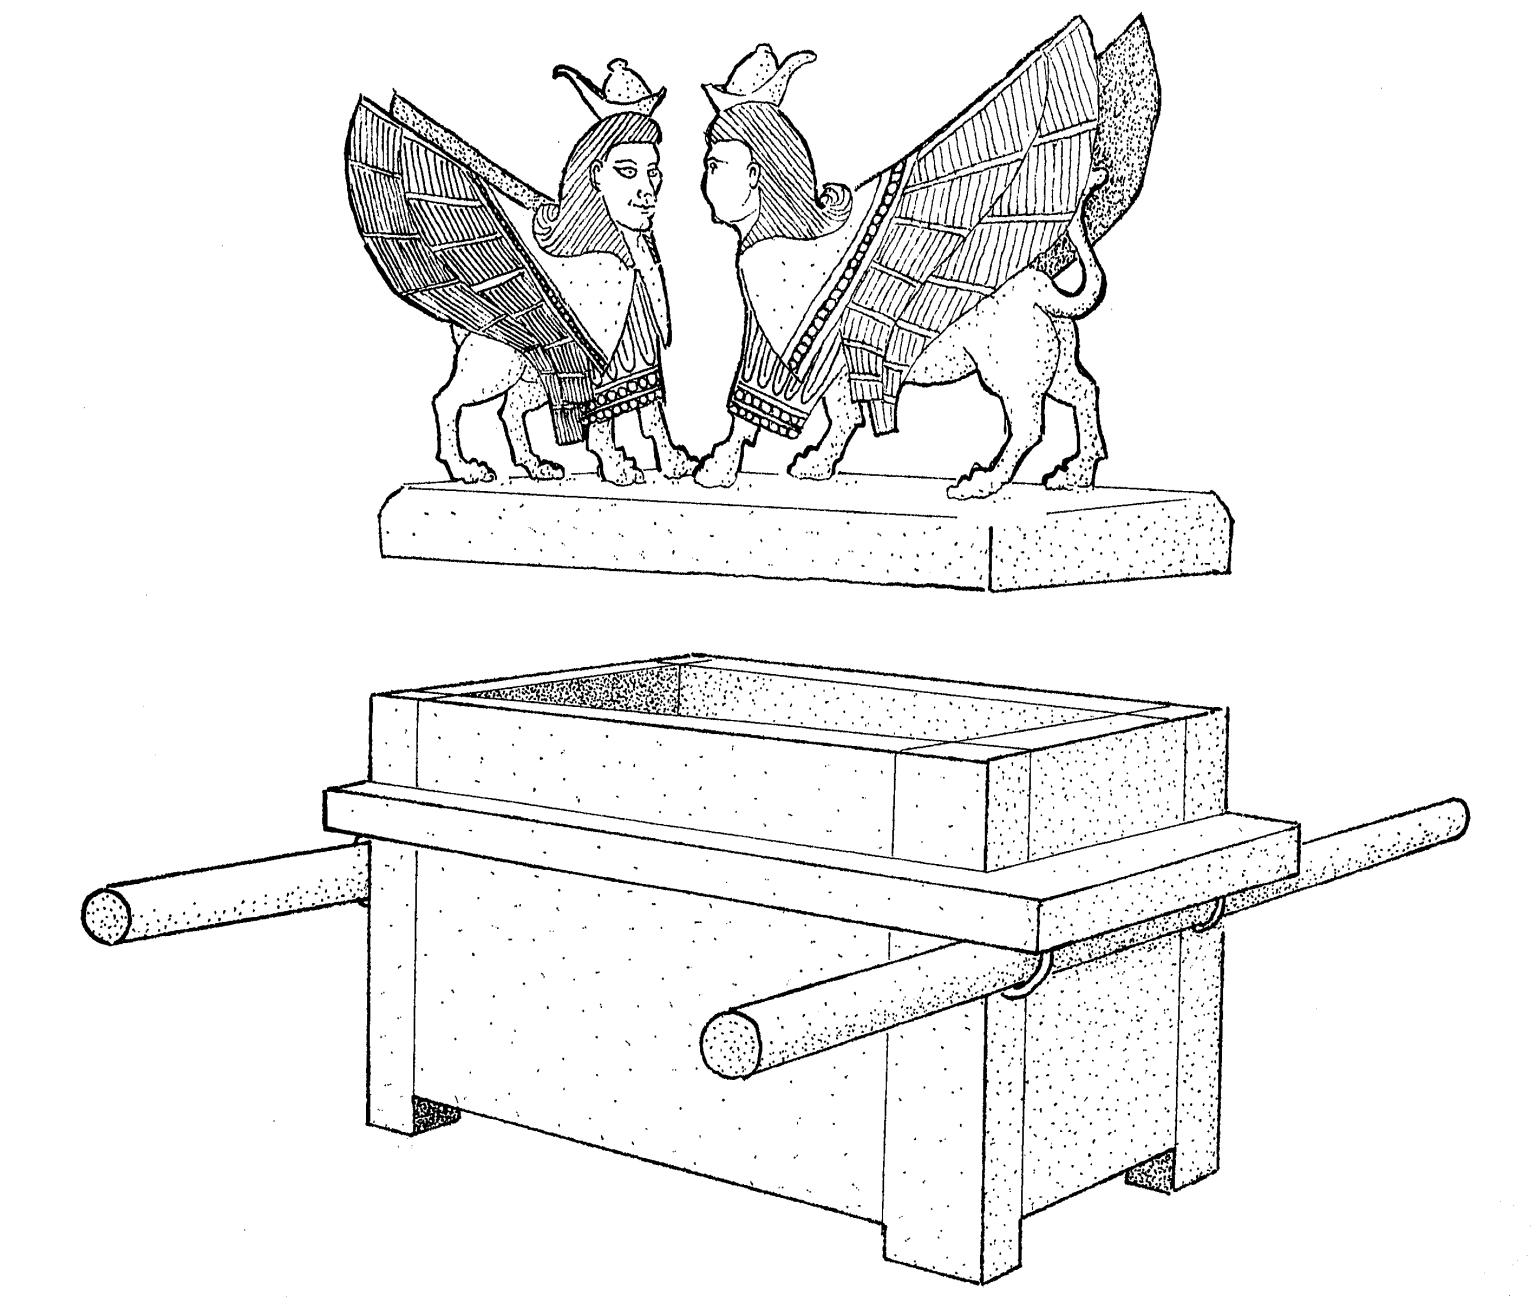 Rectangular box and separated lid with two winged figures on all fours facing each other.